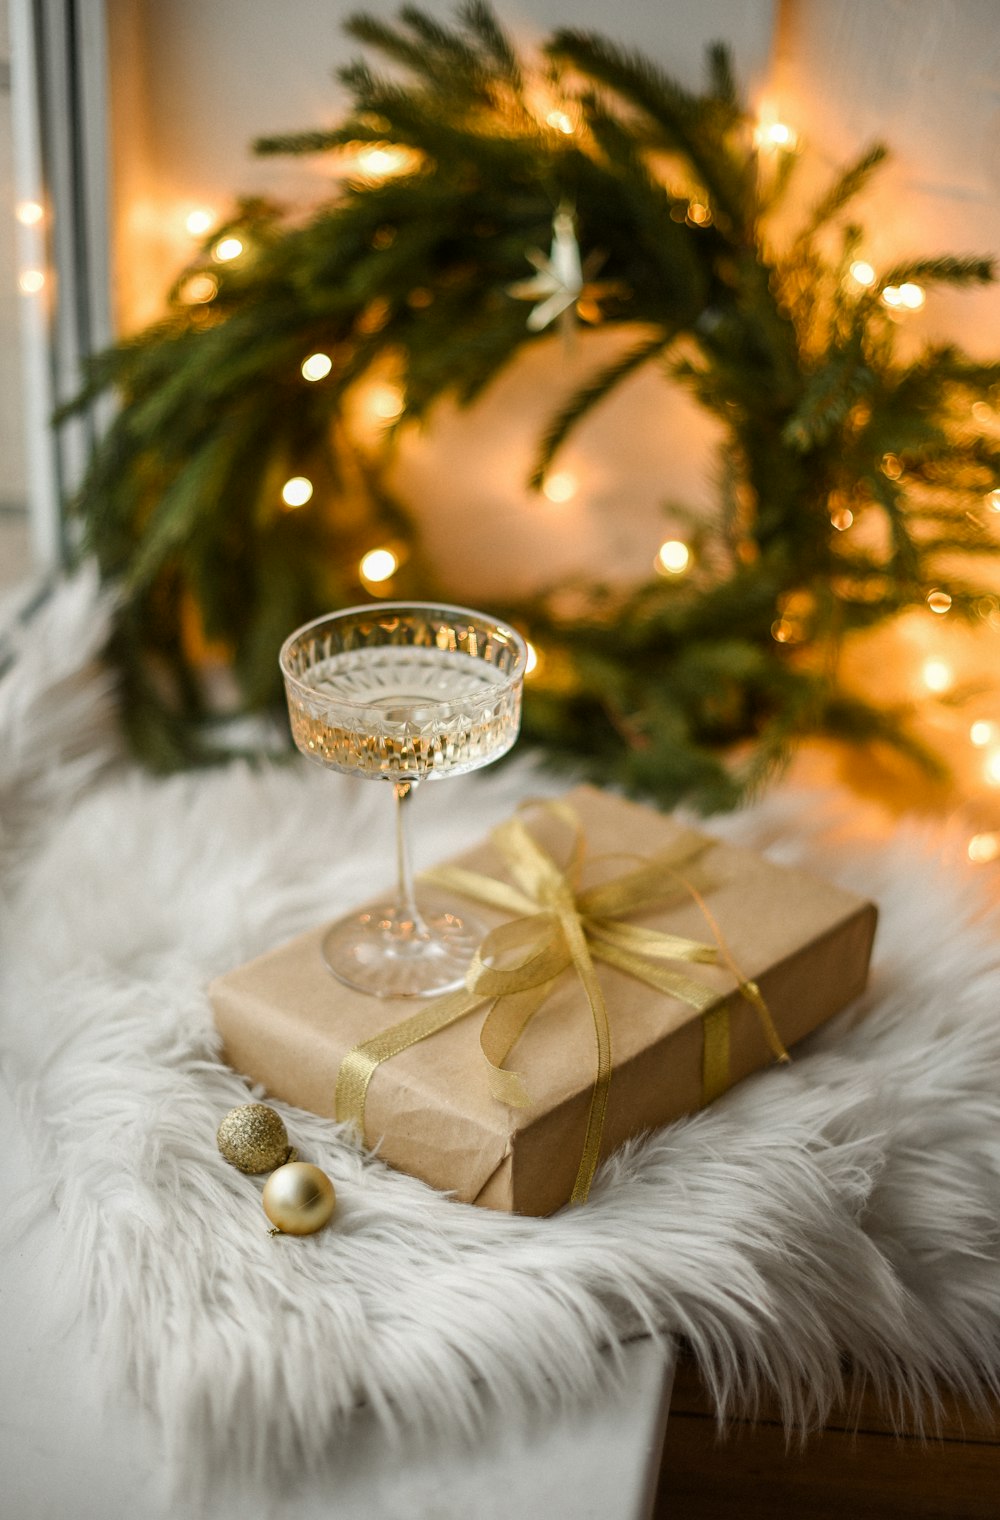 a gift wrapped in brown paper and a wine glass